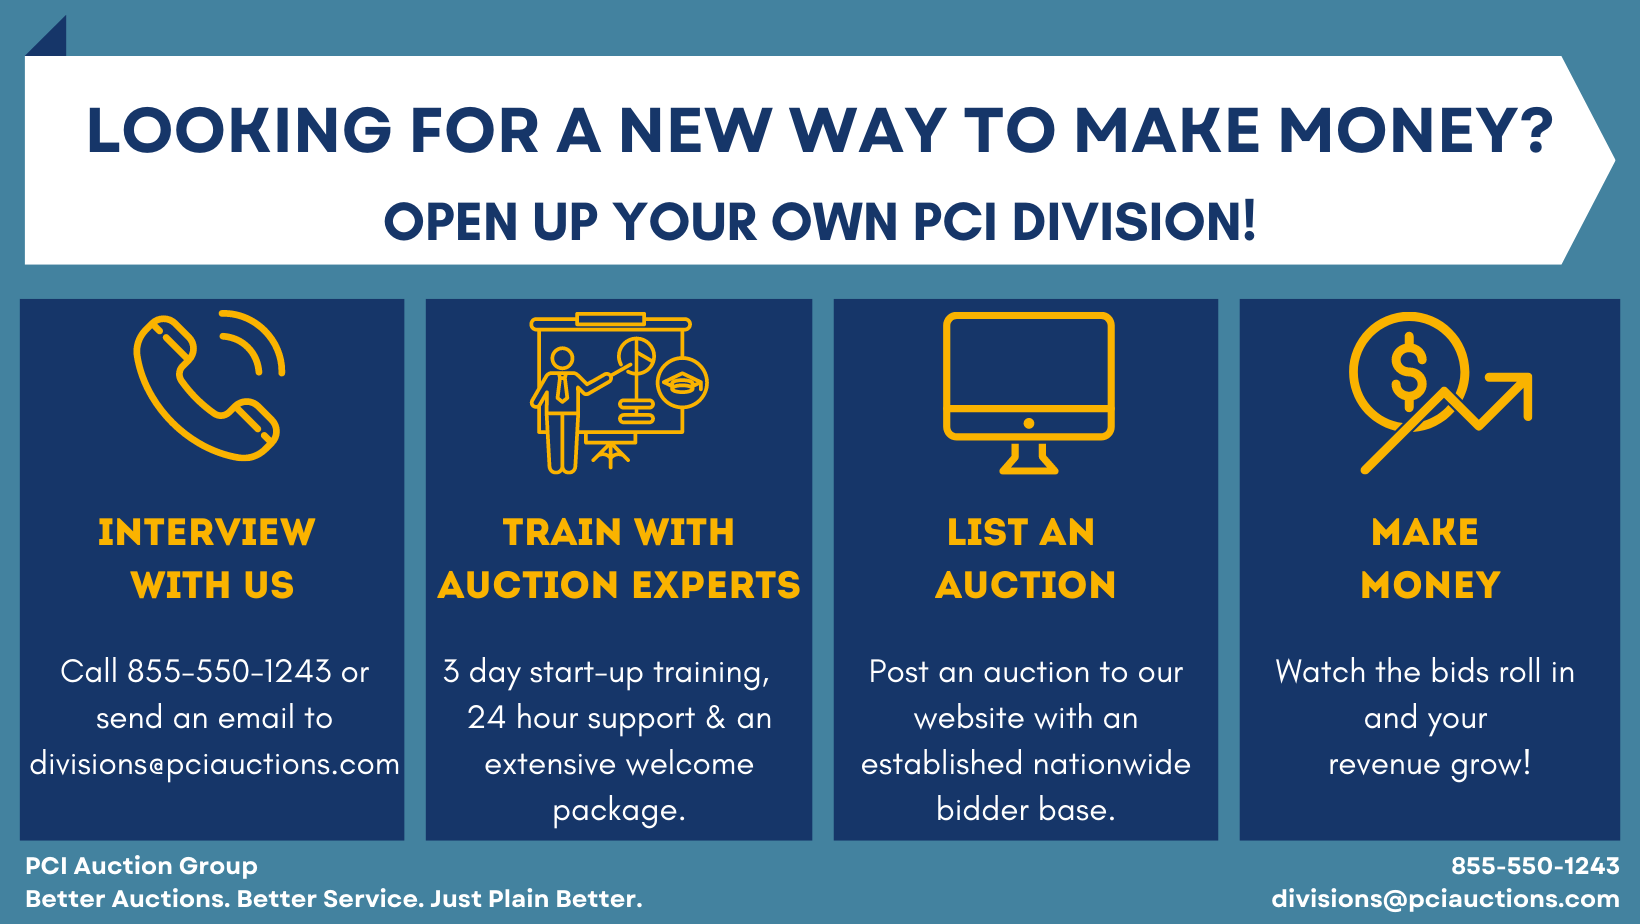 Looking for a new way to make money? Open up your own PCI division